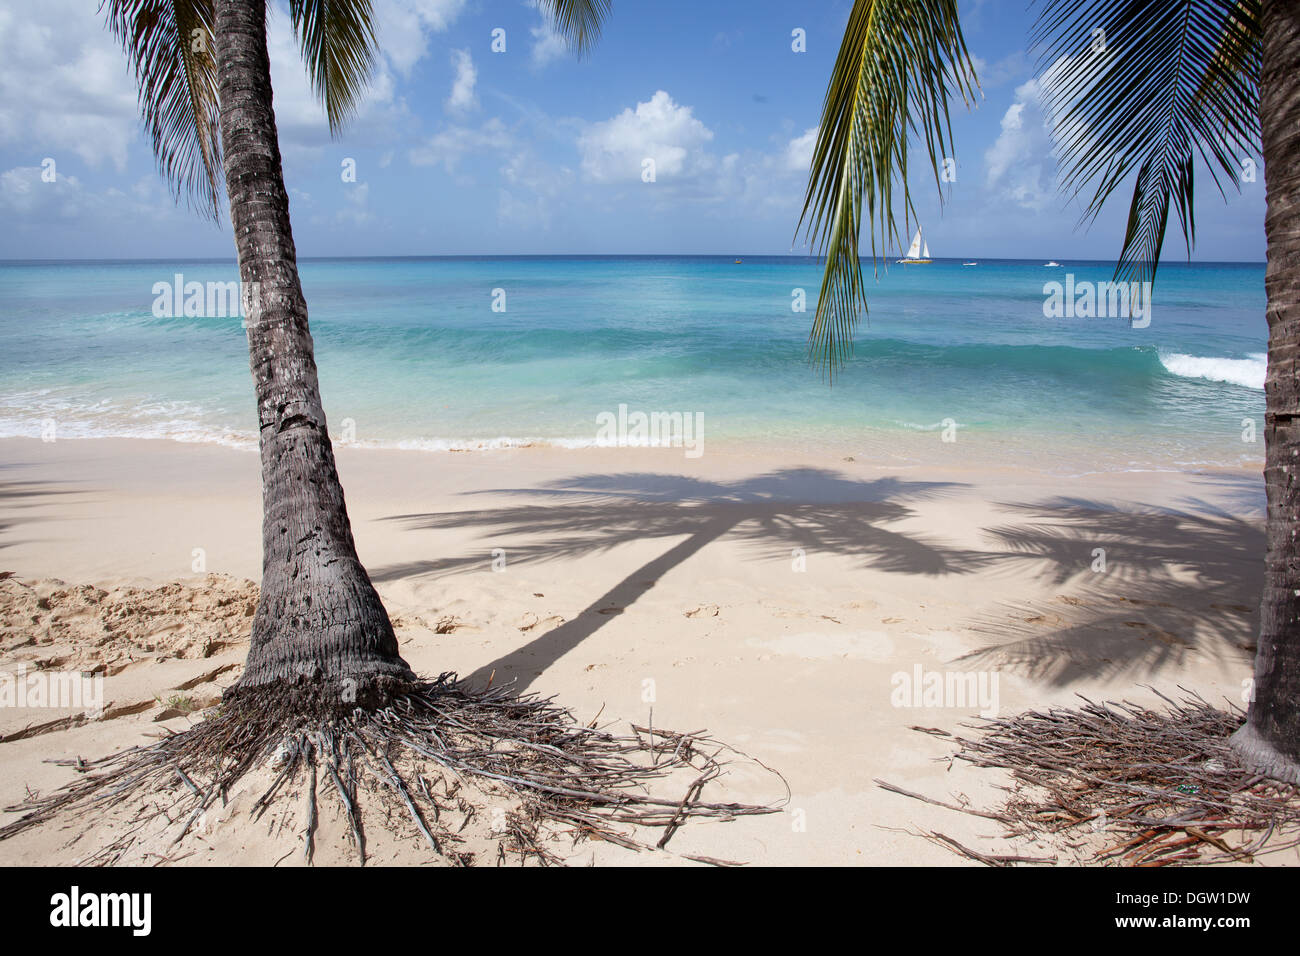 palm trees on the beach in Barbados Stock Photo